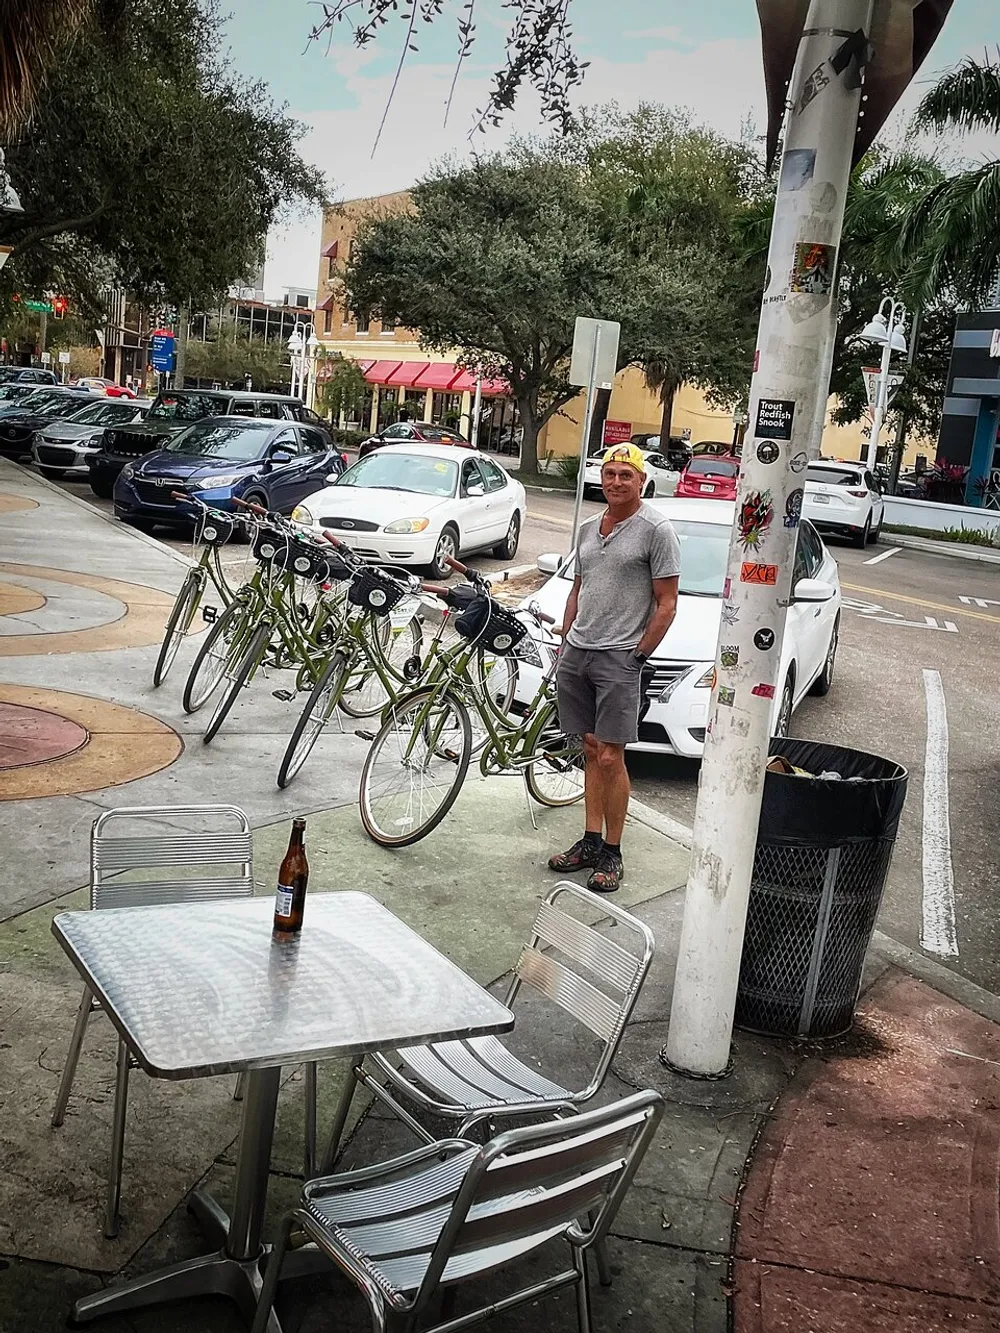 A person is standing on a sidewalk near a metal table with a bottle on it with parked bicycles and cars in the background in an urban setting